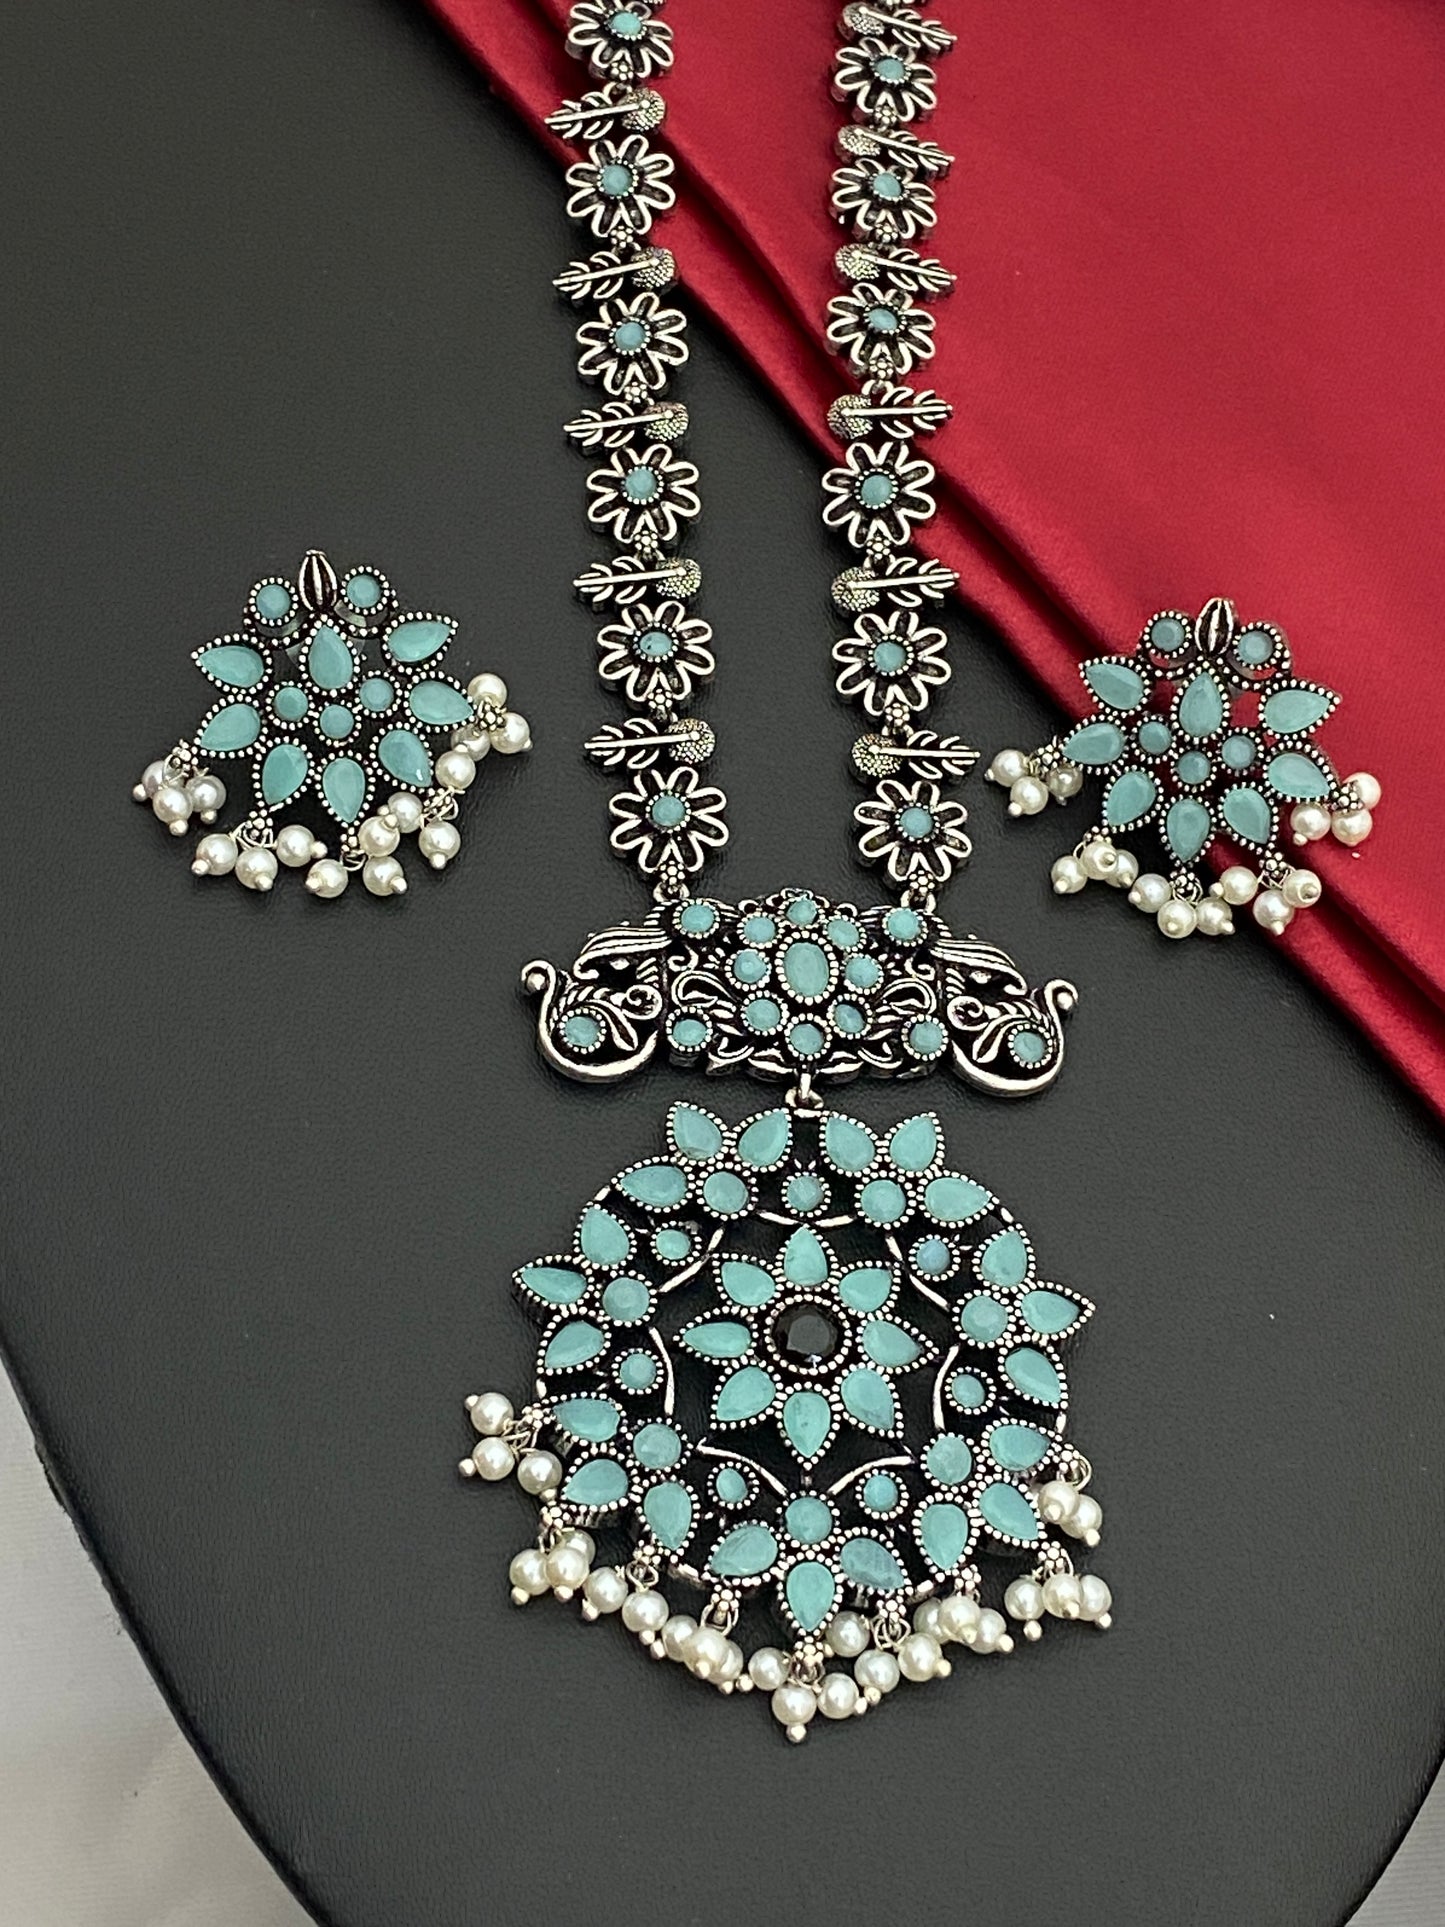 Fascinating Sky Blue Color Floweret Style And Pearl German Silver Oxidized Necklace With Earrings